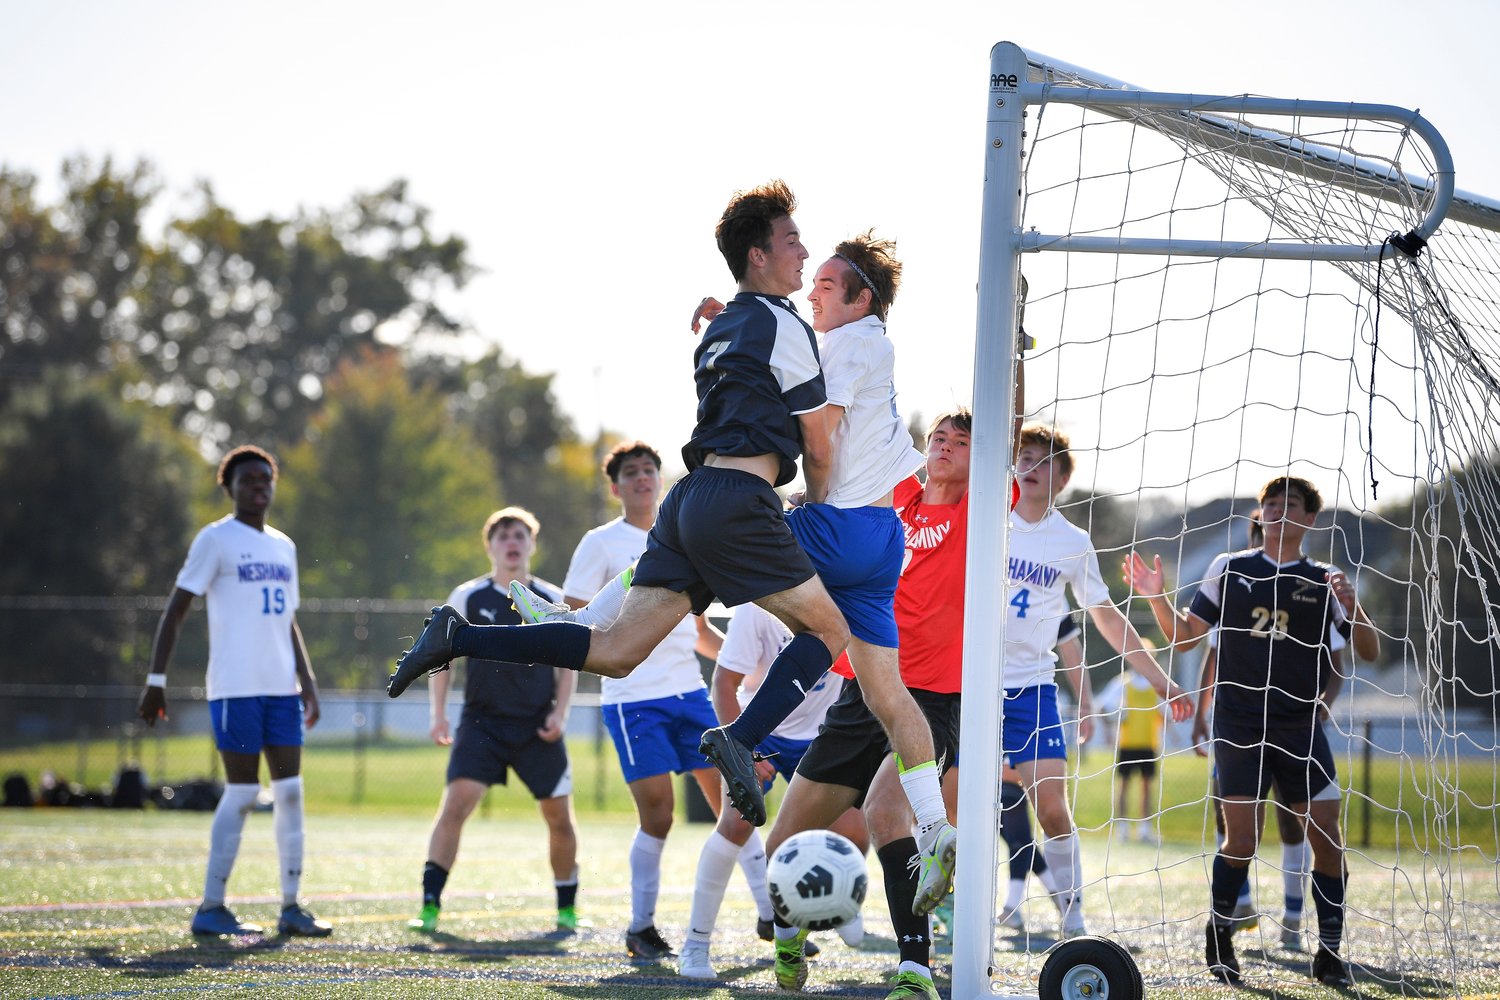 Council Rock South’s Francis Rafferty and Neshaminy’s Chris Valley collide during a corner kick in the front of the net.